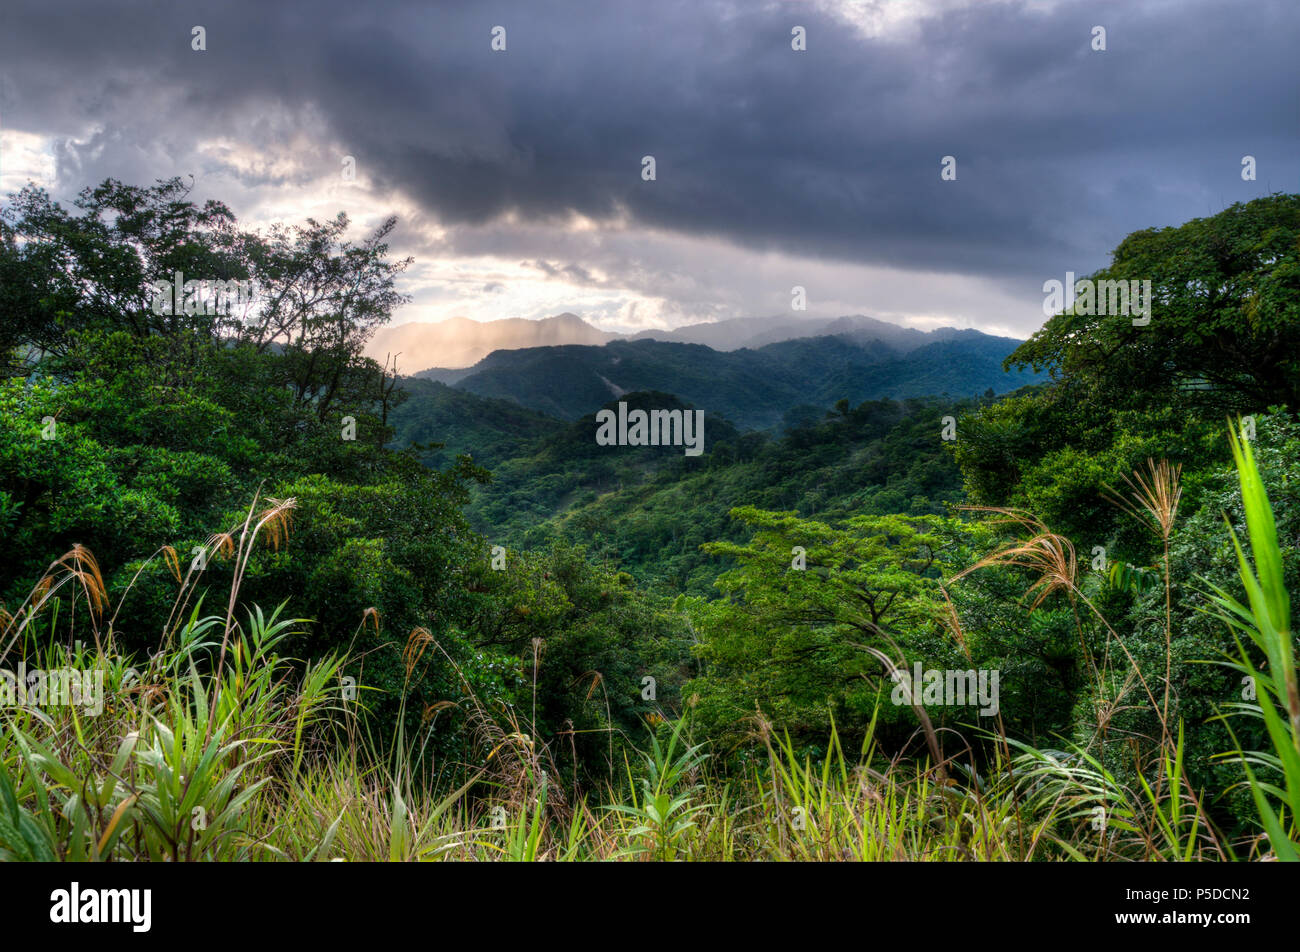 A landscape looking out over the rainforest in Panama, Central America Stock Photo